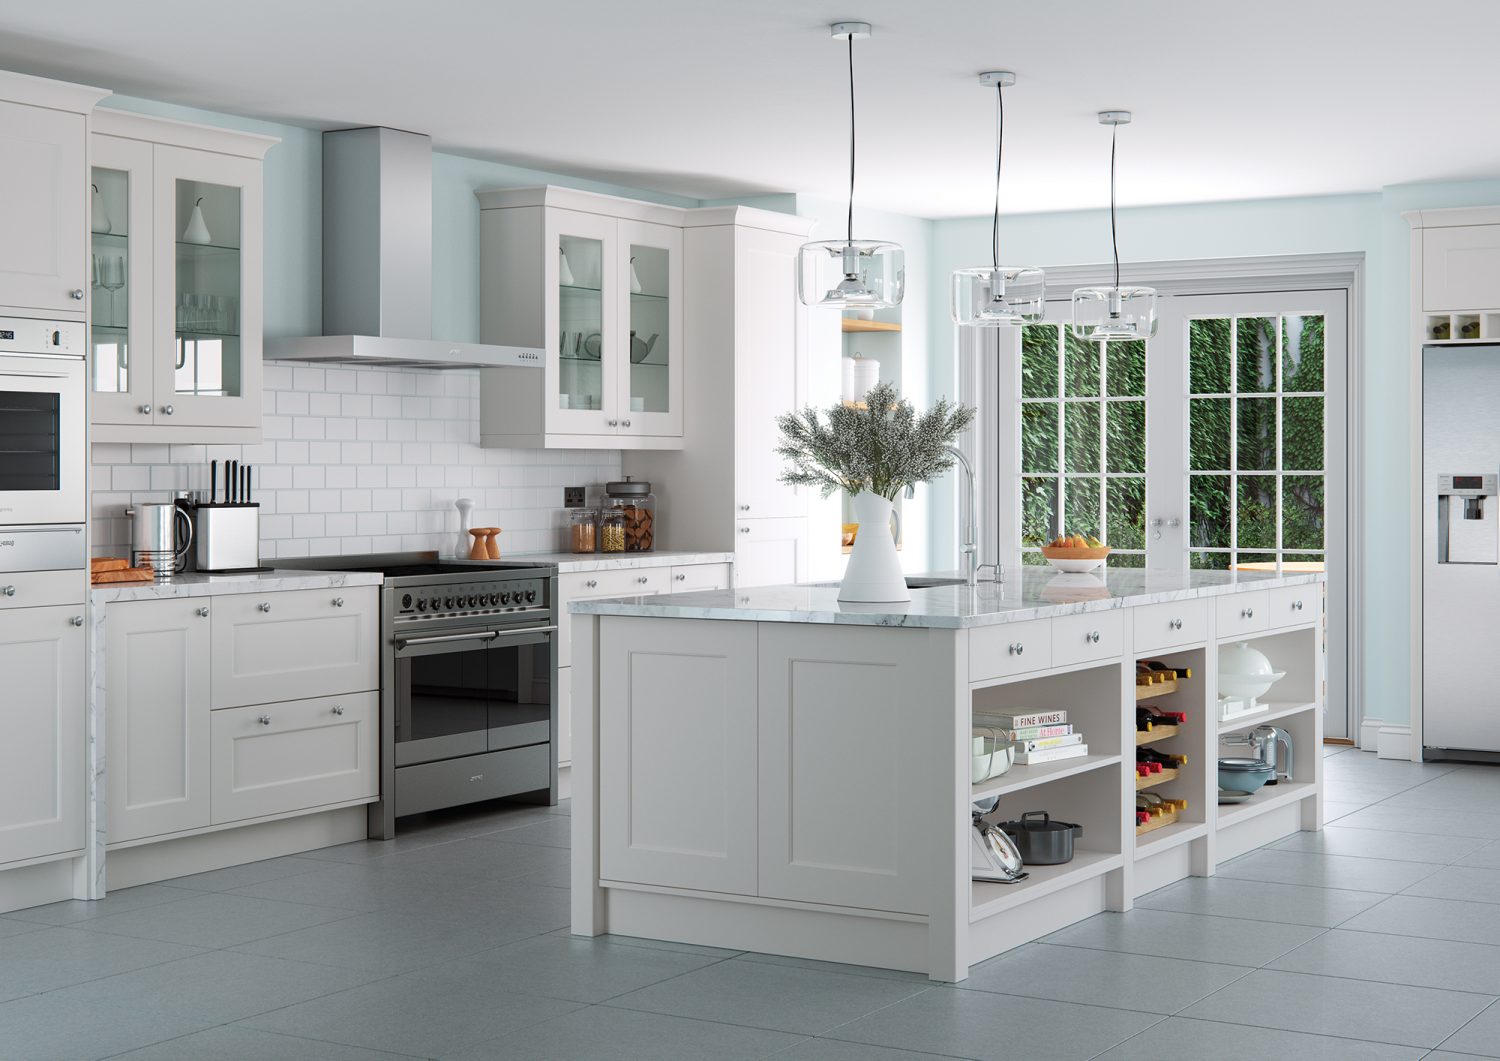 Fiorenza kitchen shaker door is showcased beautifully in Light Grey in this kitchen design. A double oven, kitchen island and hanging lighting was used in this design by The Kitchen Depot.